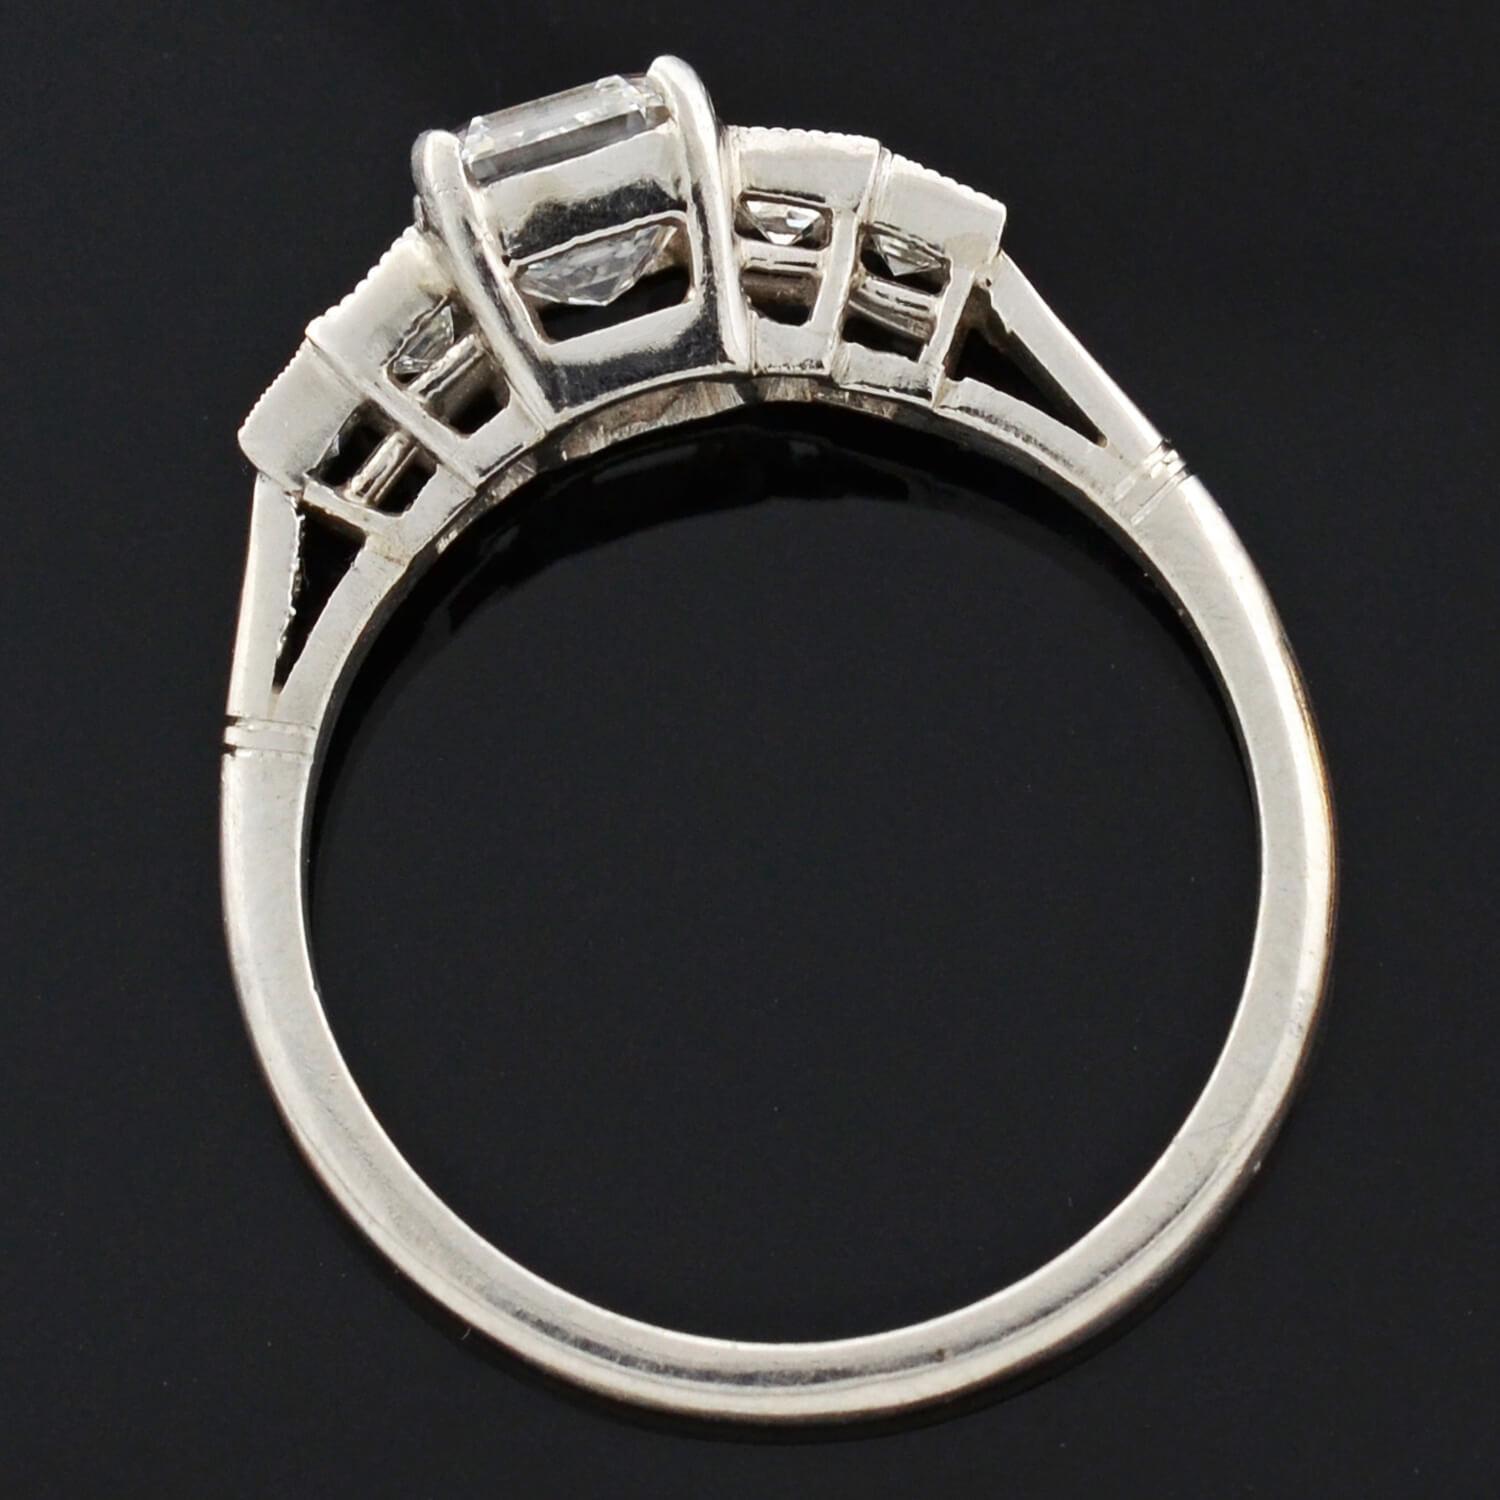 Late Art Deco Platinum Asscher Cut Diamond Engagement Ring 1.03ct In Good Condition For Sale In Narberth, PA